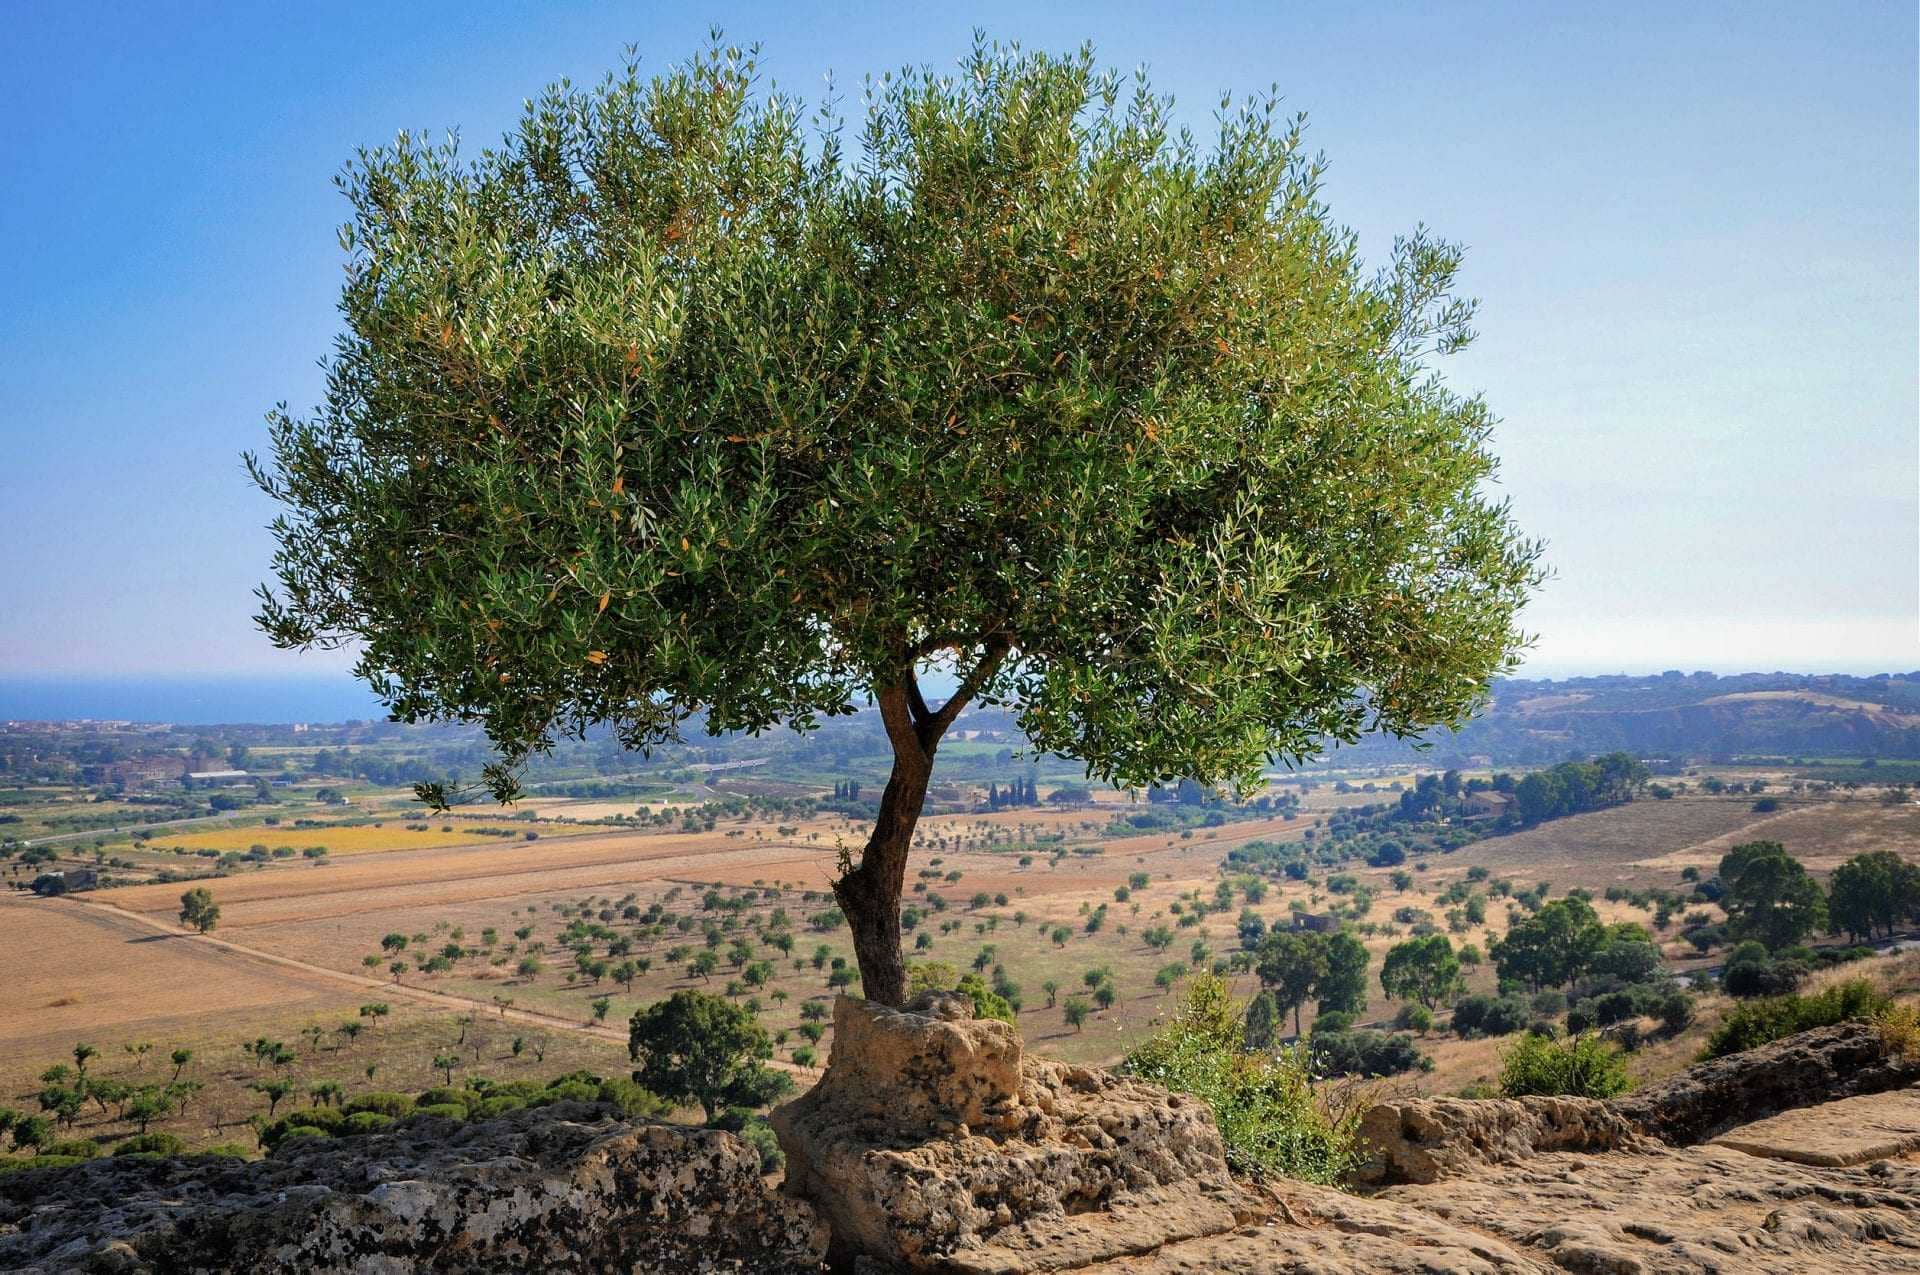 world-production-challenges-await-growers-as-mediterranean-basin-becomes-hotter-and-drier-olive-oil-times